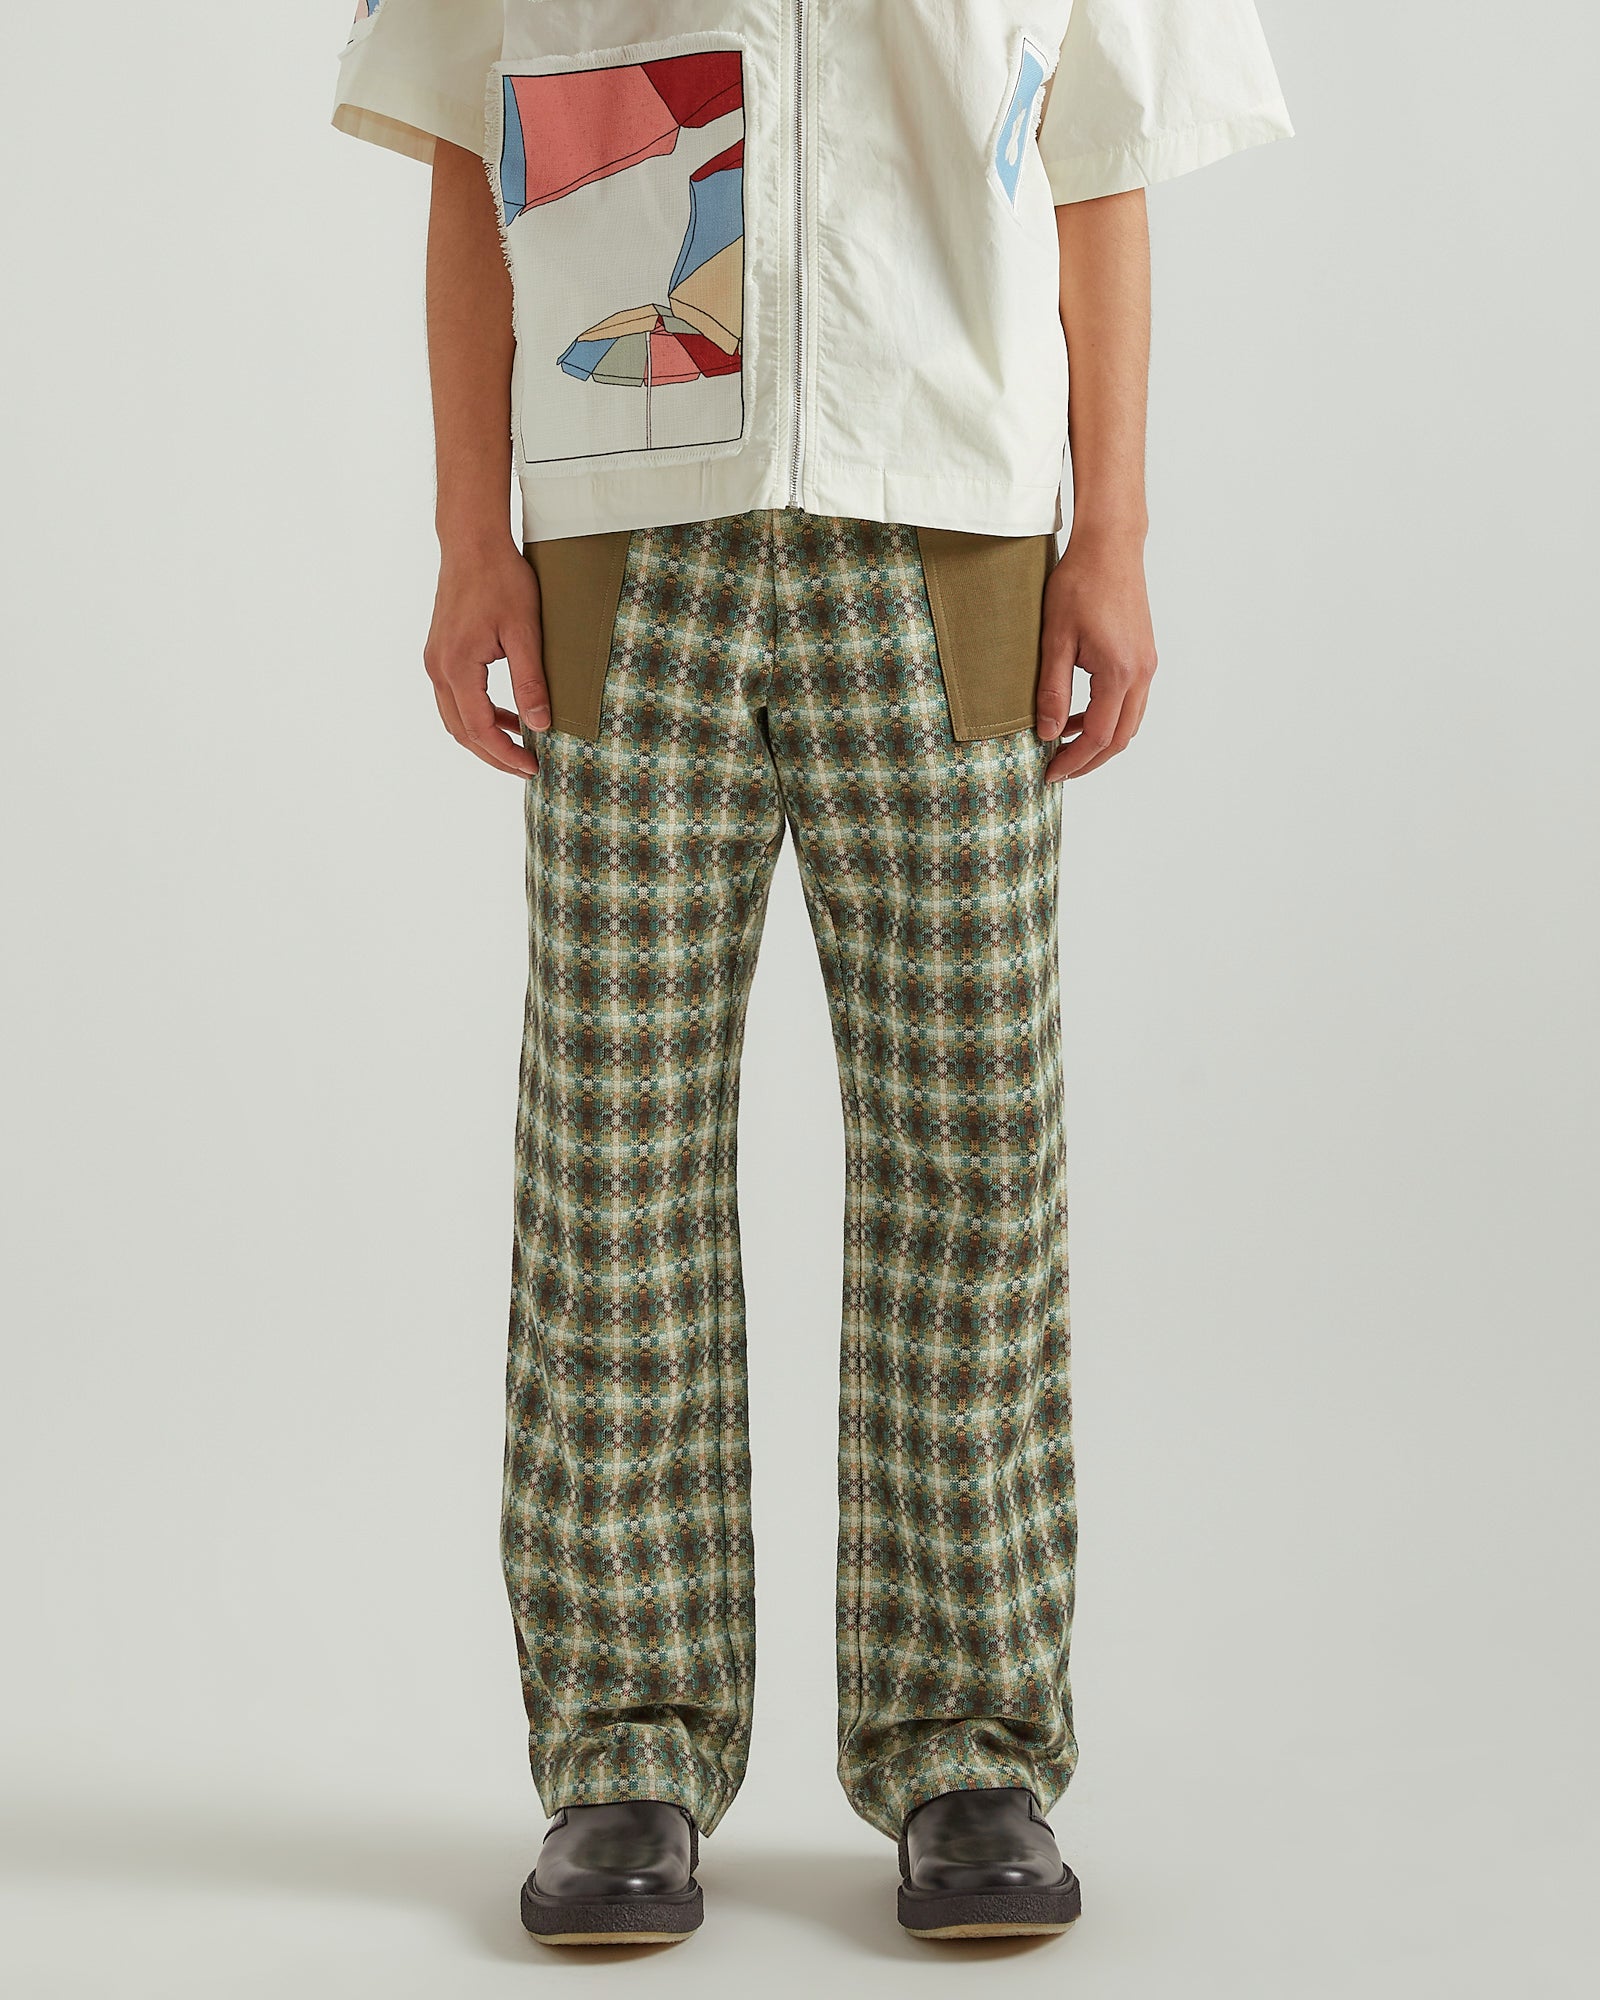 Patchwork Pants in Green Plaid